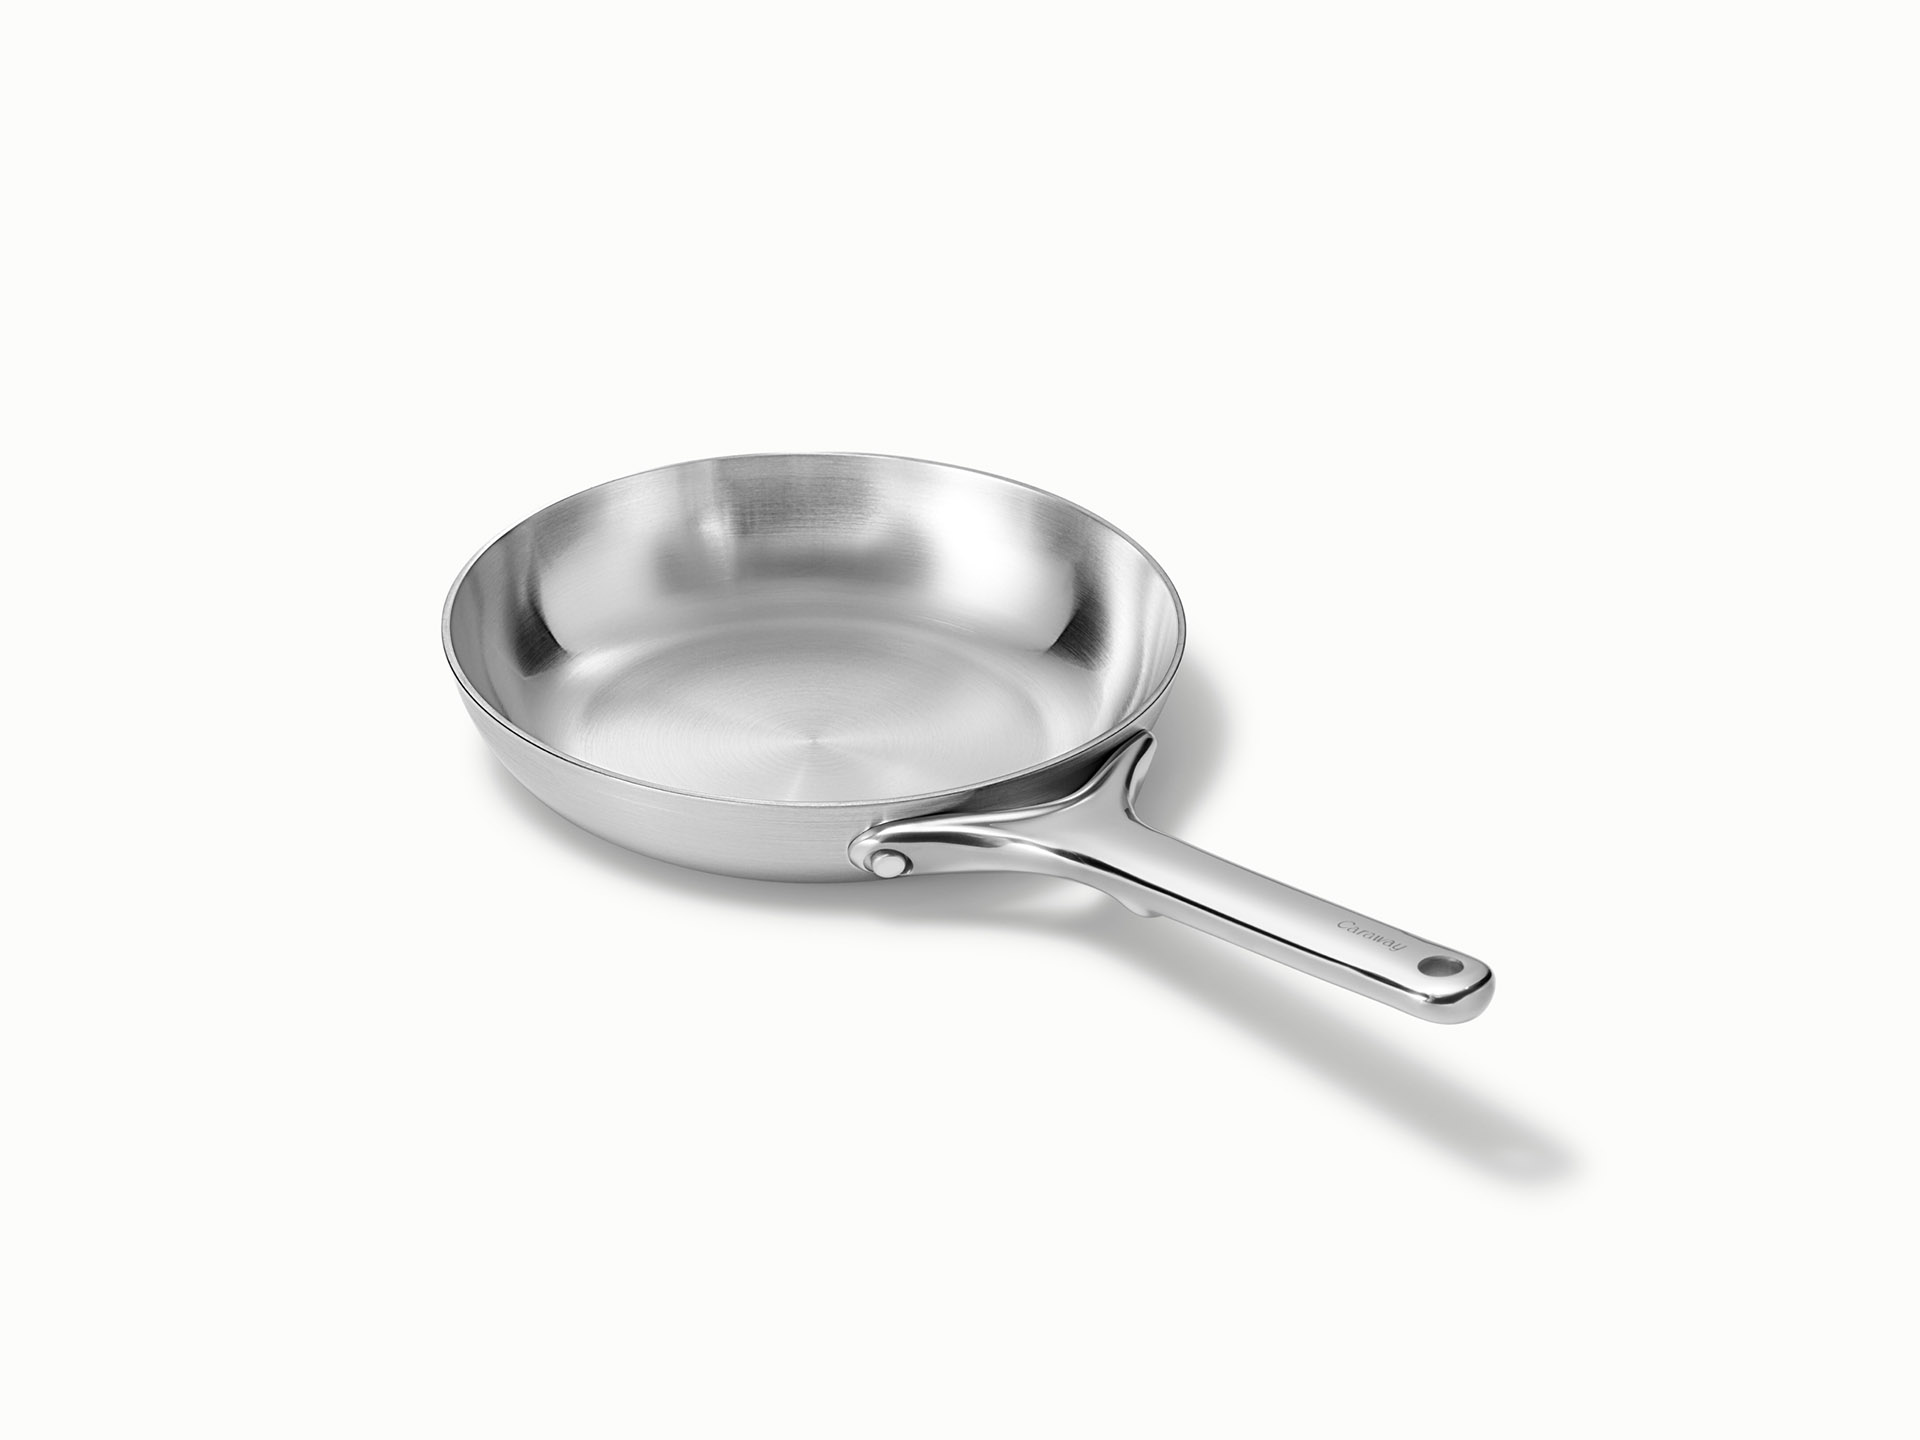 https://images.ctfassets.net/dfp1t53x5luq/YNHbyoBhEkJG9OZ2VIWAK/989386aa2599d14f8a4ba1bd3e24bb8a/Mini_Fry_Pan_-_Stainless_Steel_-_Ecomm_on_White.jpg